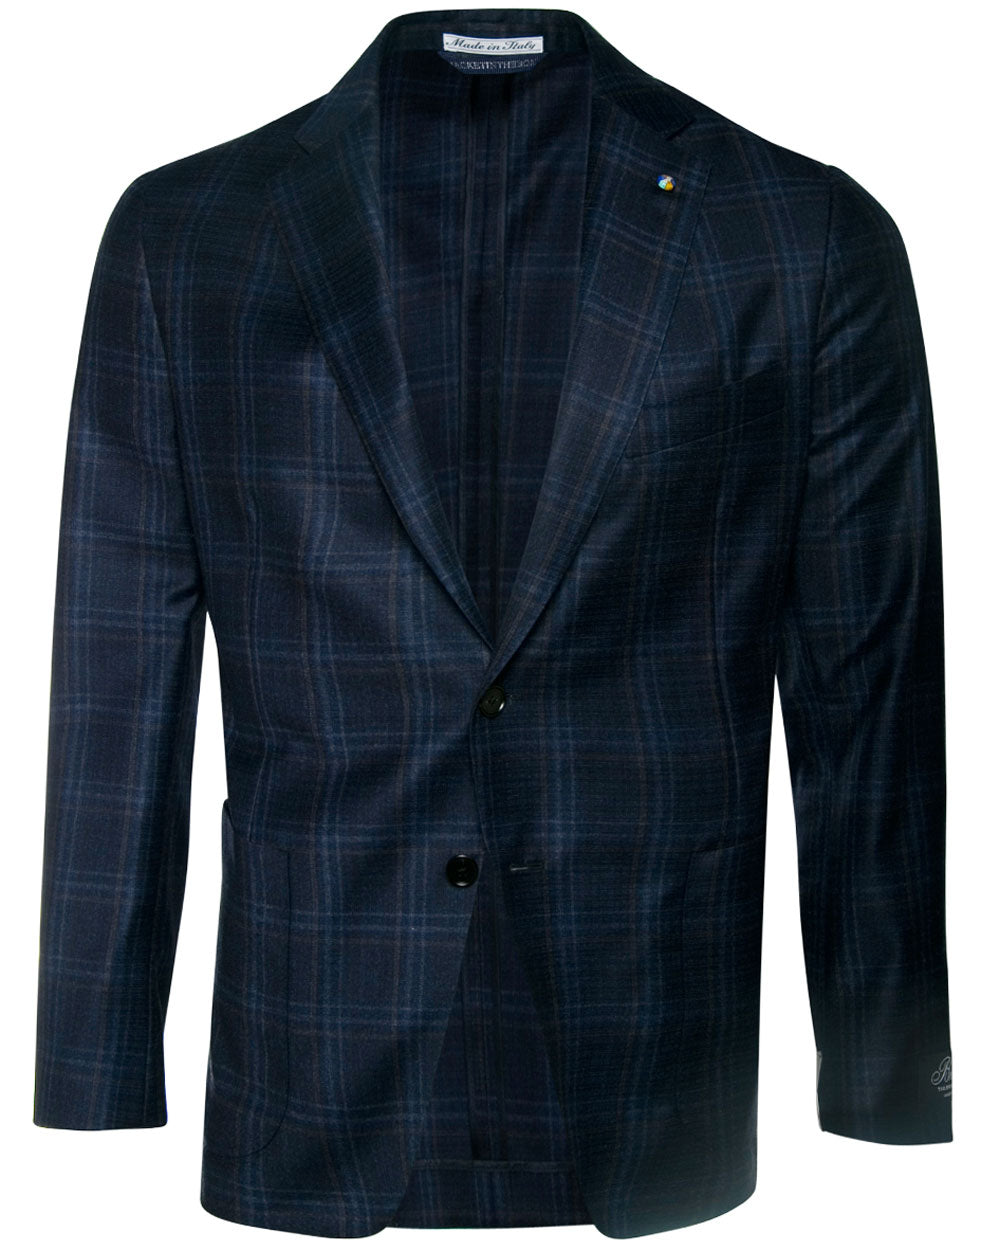 Dark Blue and Rust Check Sportcoat